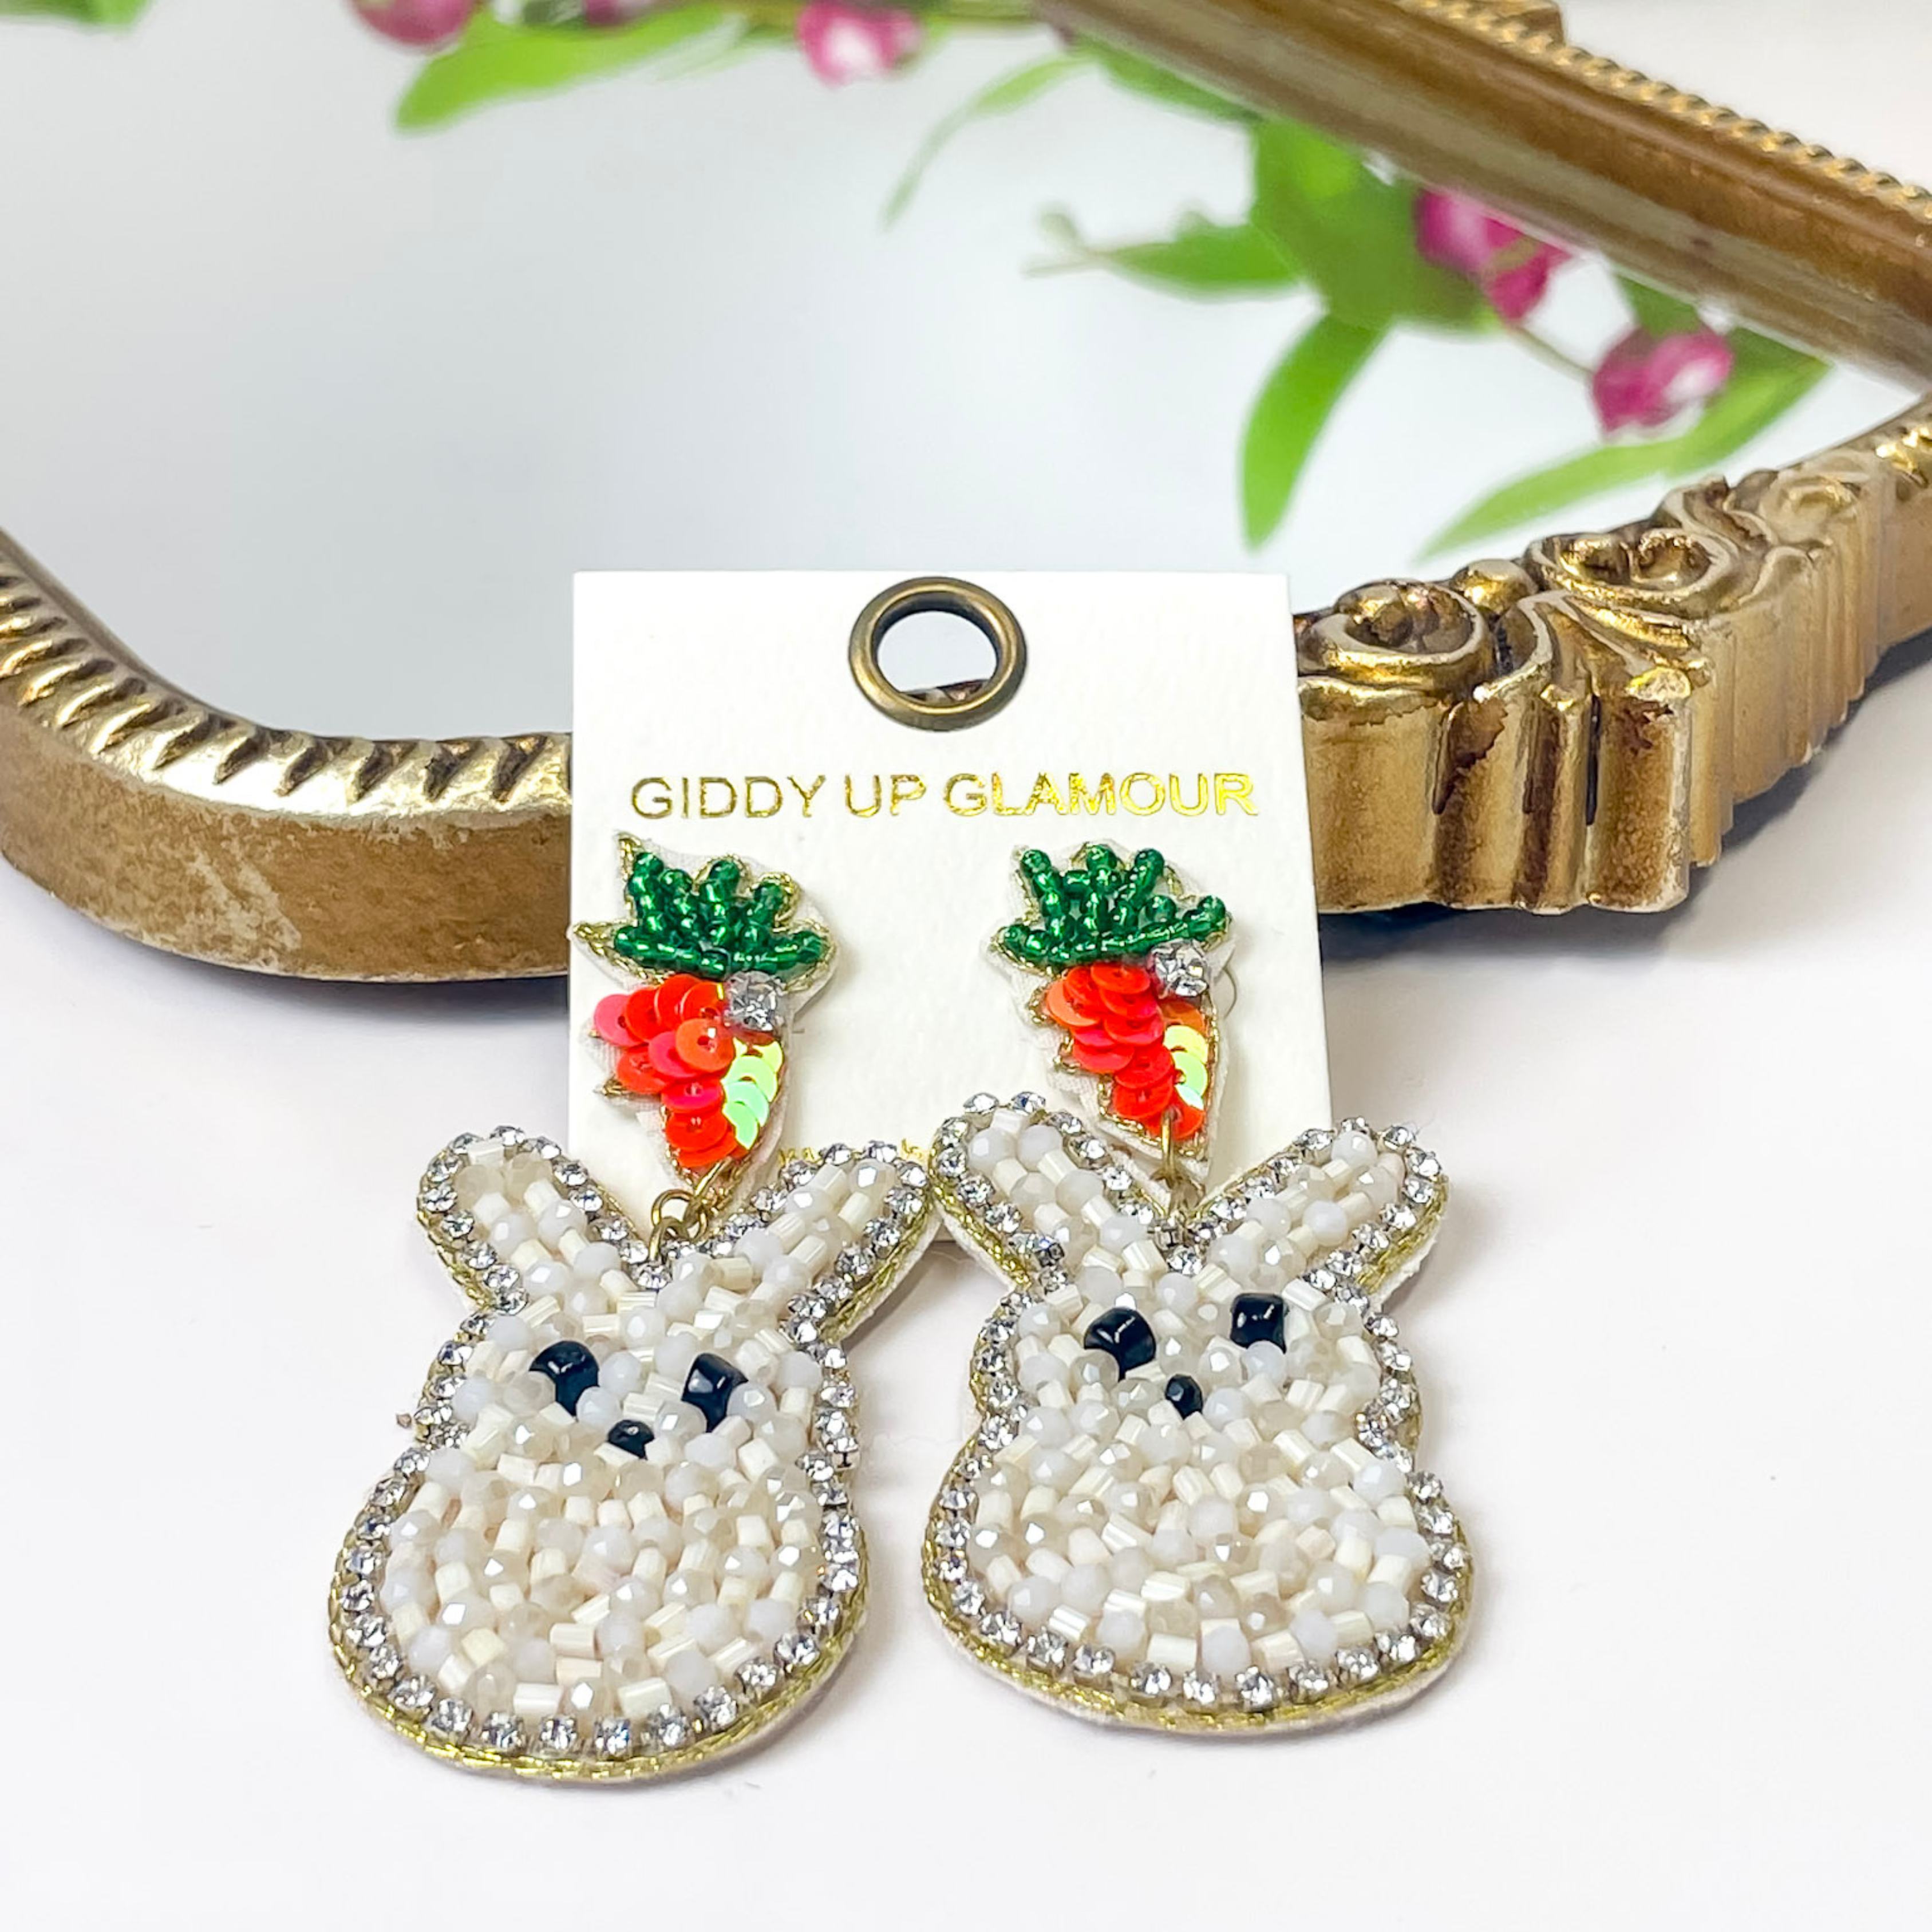 Bunny Beaded Earrings in White - Giddy Up Glamour Boutique